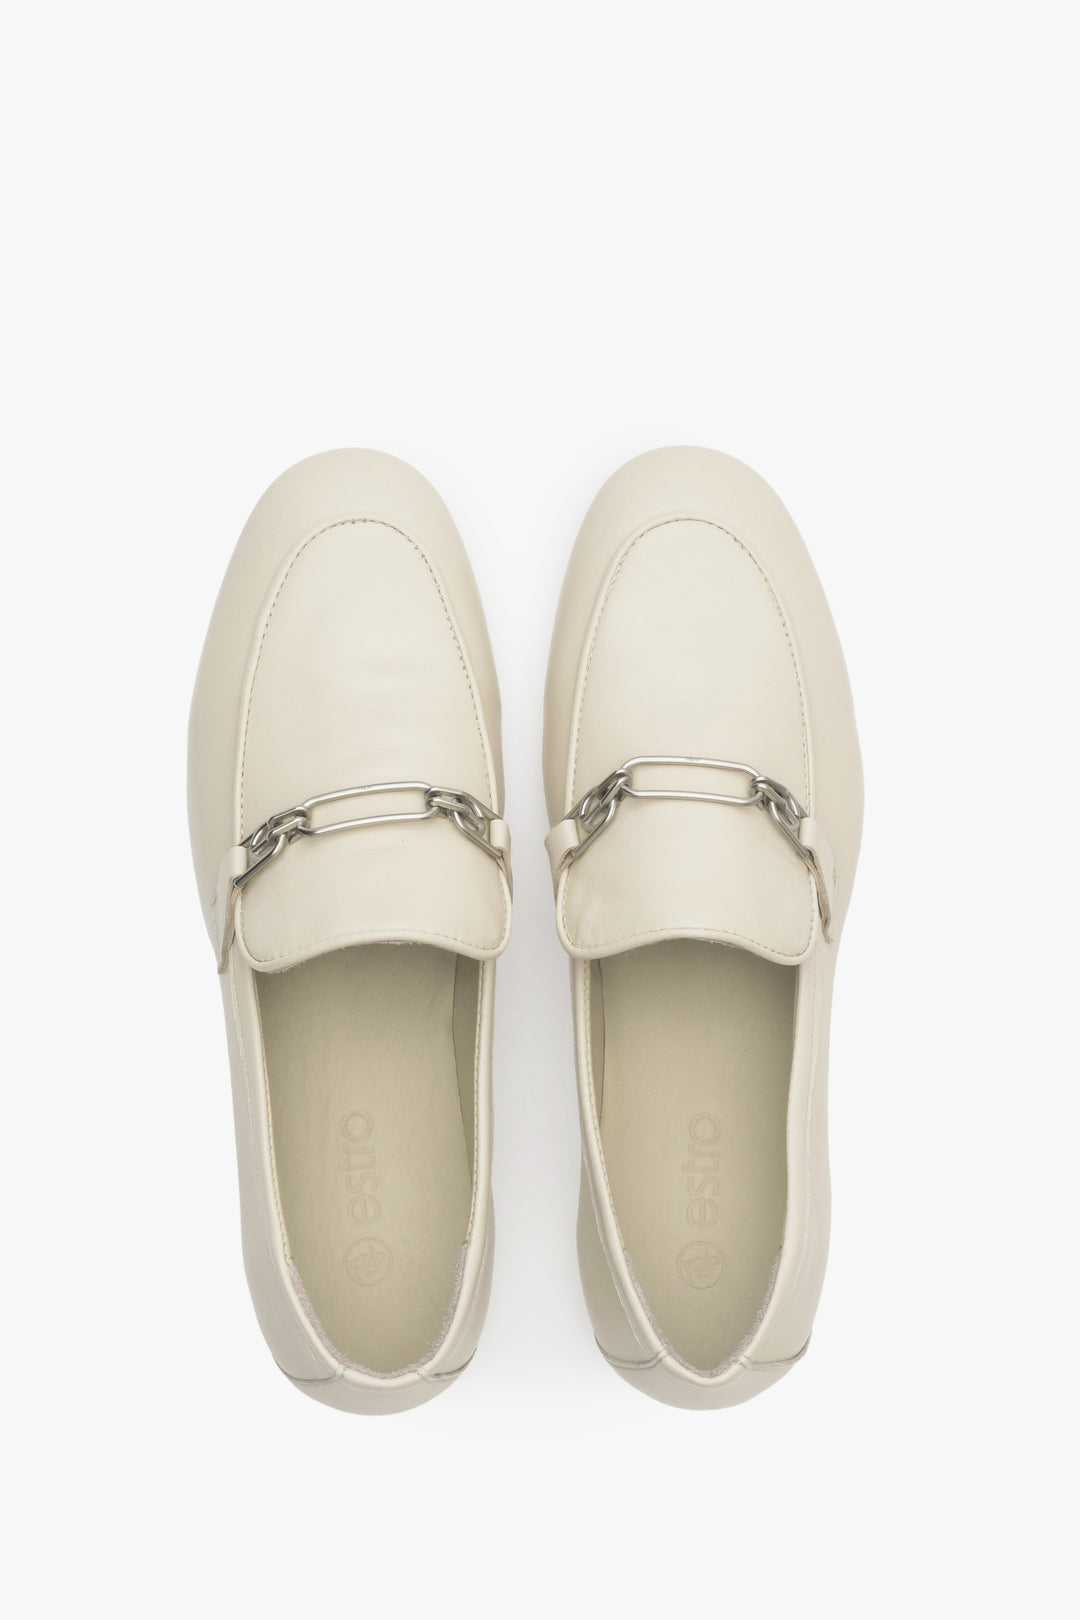 Women's light beige leather penny loafers Estro - presentation from above.